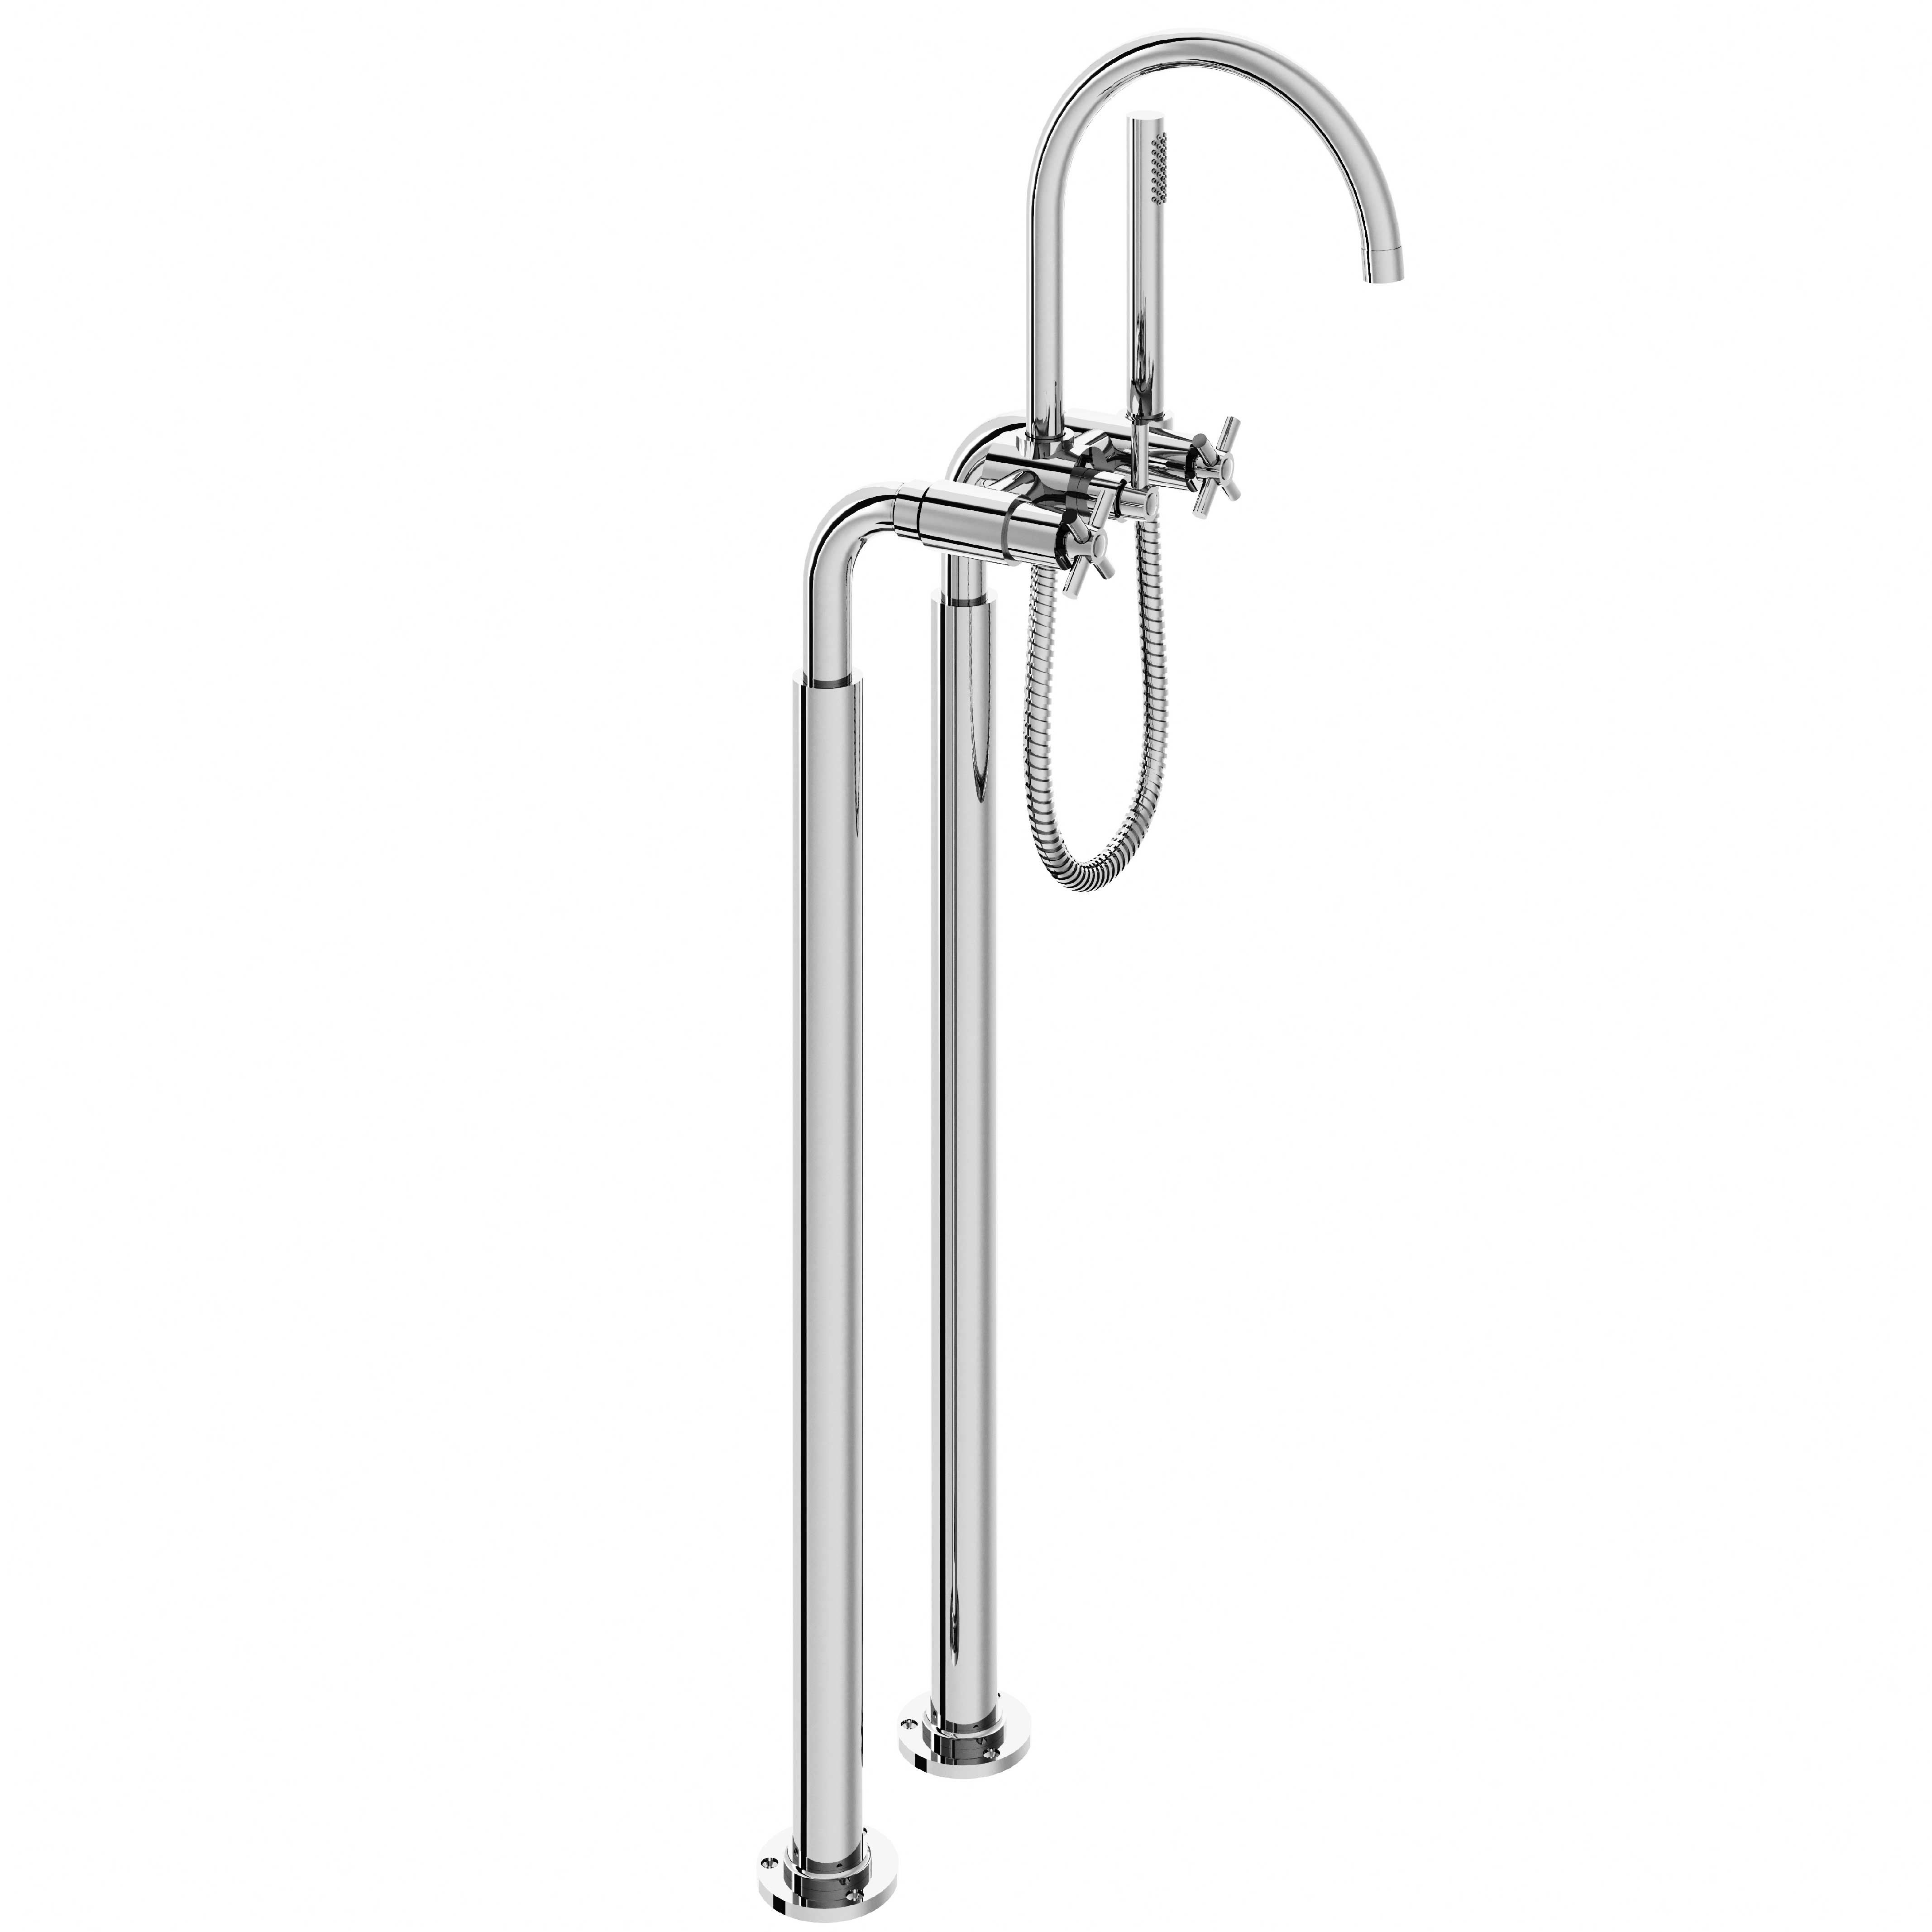 M90-3309 Floor mounted bath and shower mixer